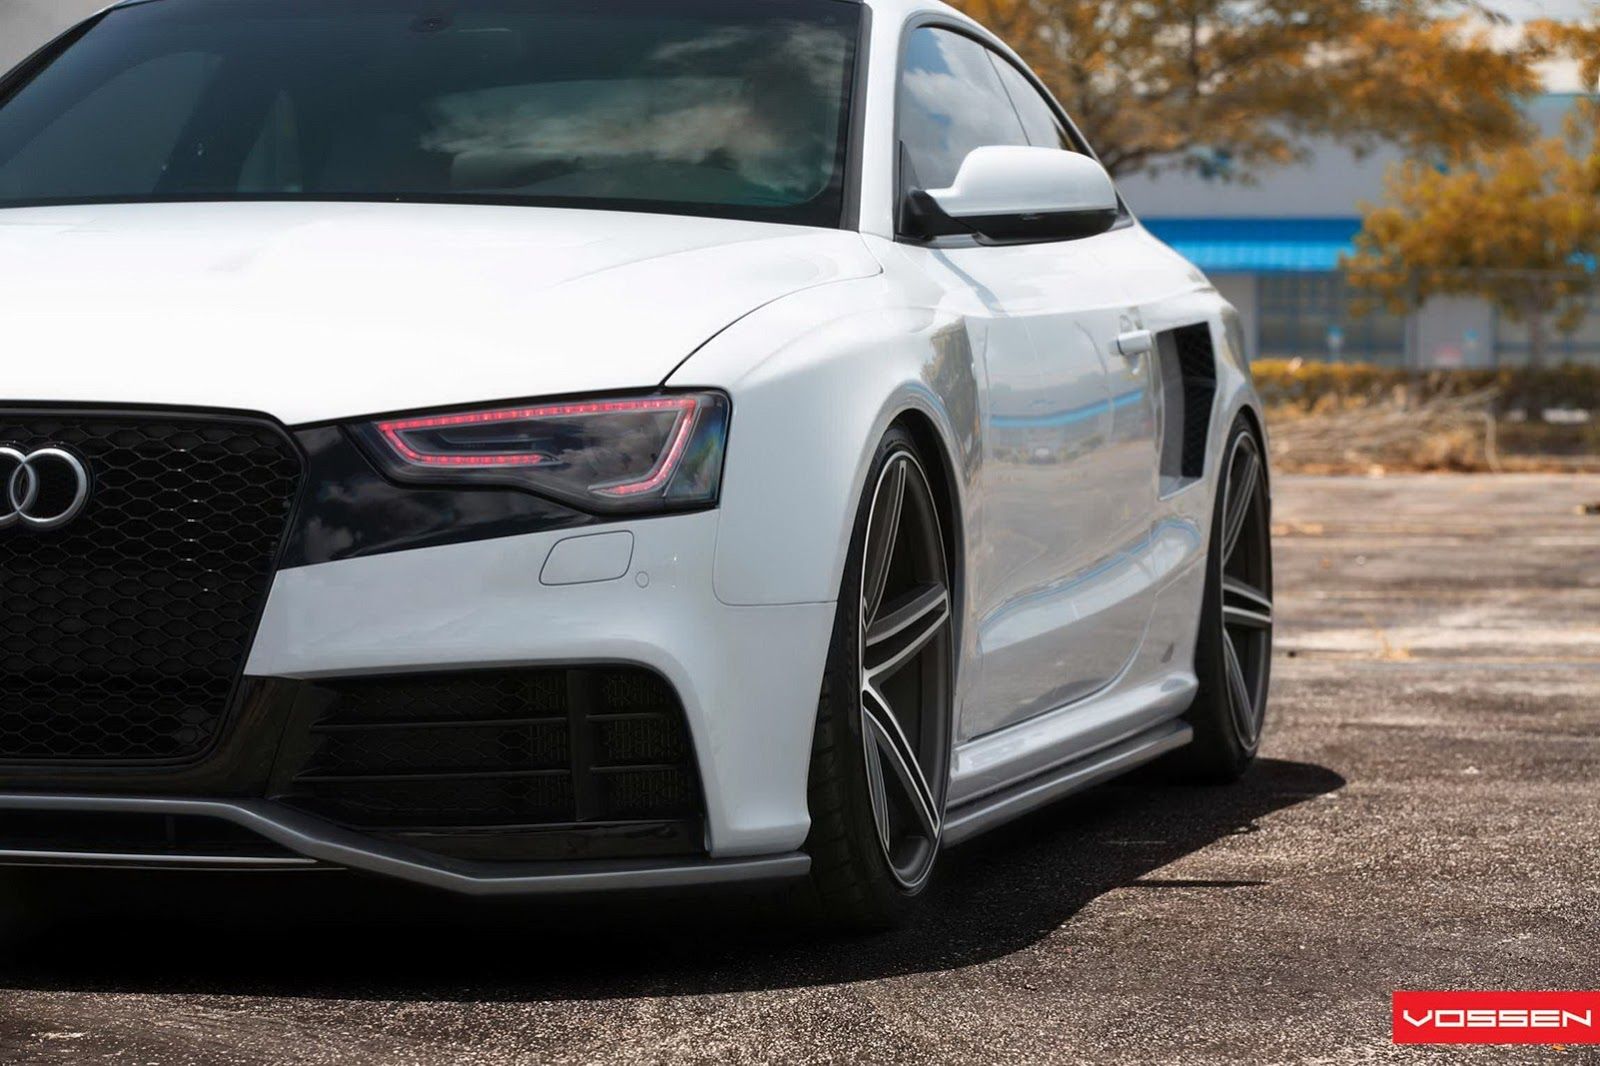 2013 Audi RS5 by OSS Designs